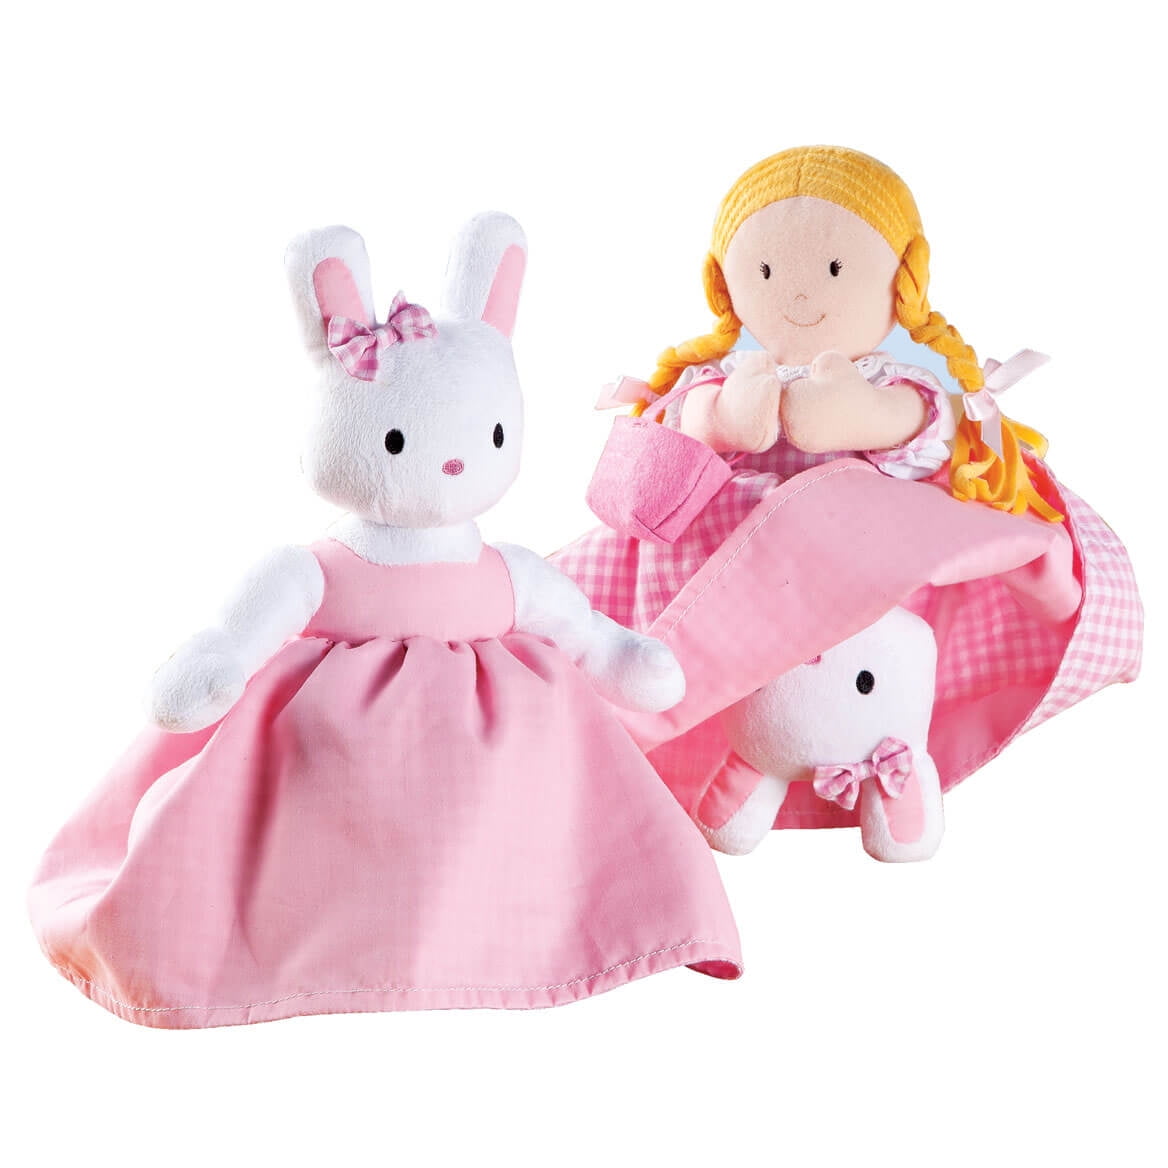 NEW BEAUTIFUL EASTER DOLL IN CHICK,BUNNY,SHEEP OUTFIT SOFT PLUSH TOY 